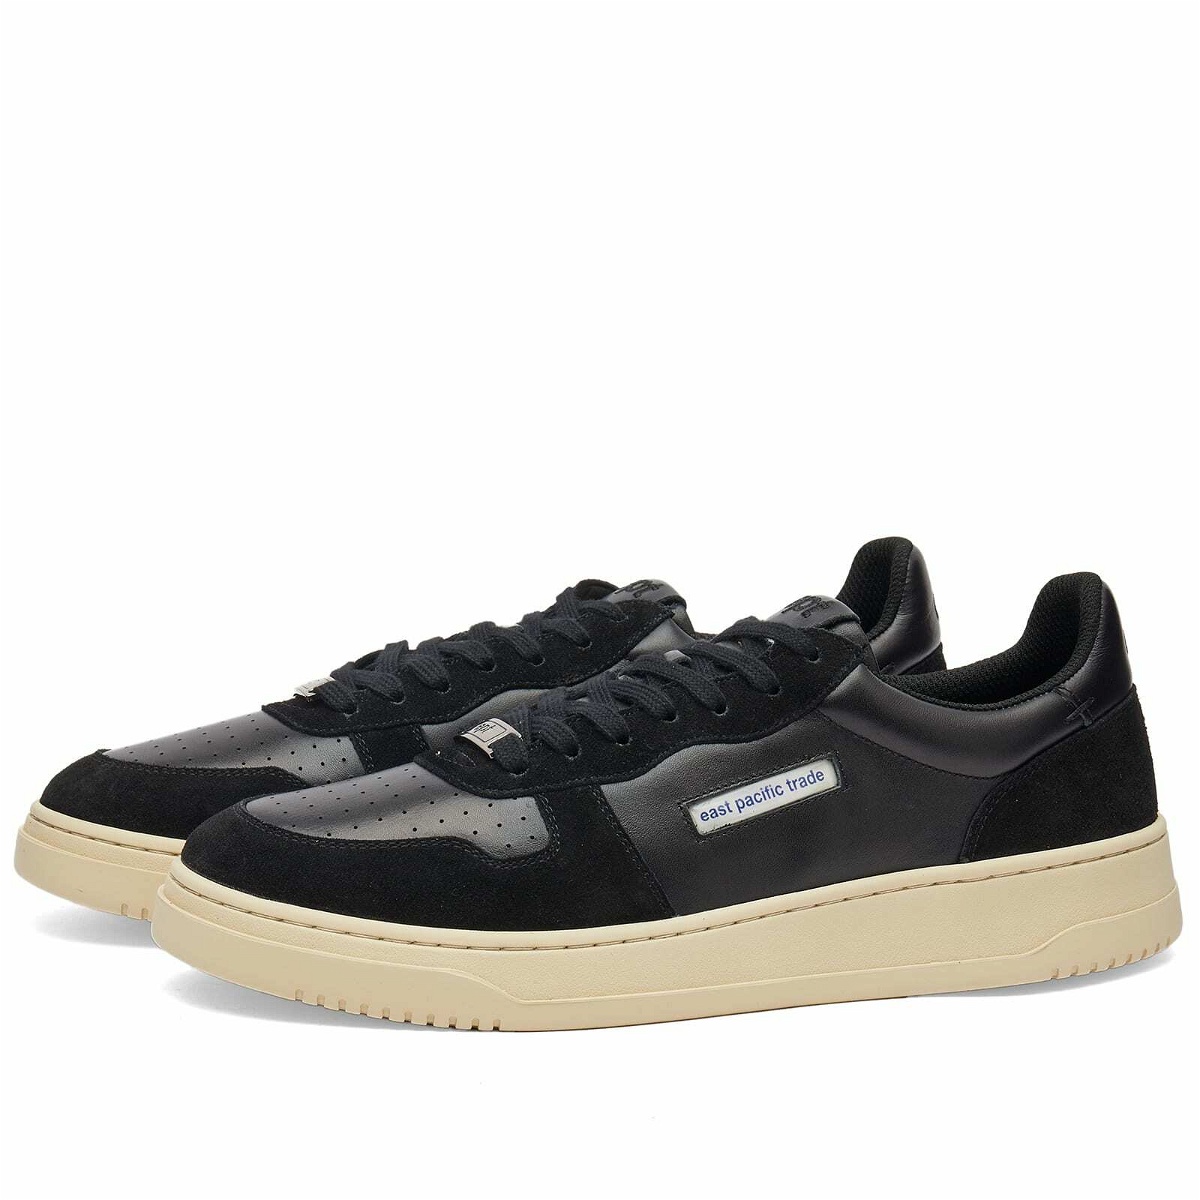 Photo: East Pacific Trade Men's Dive Court Sneakers in Black